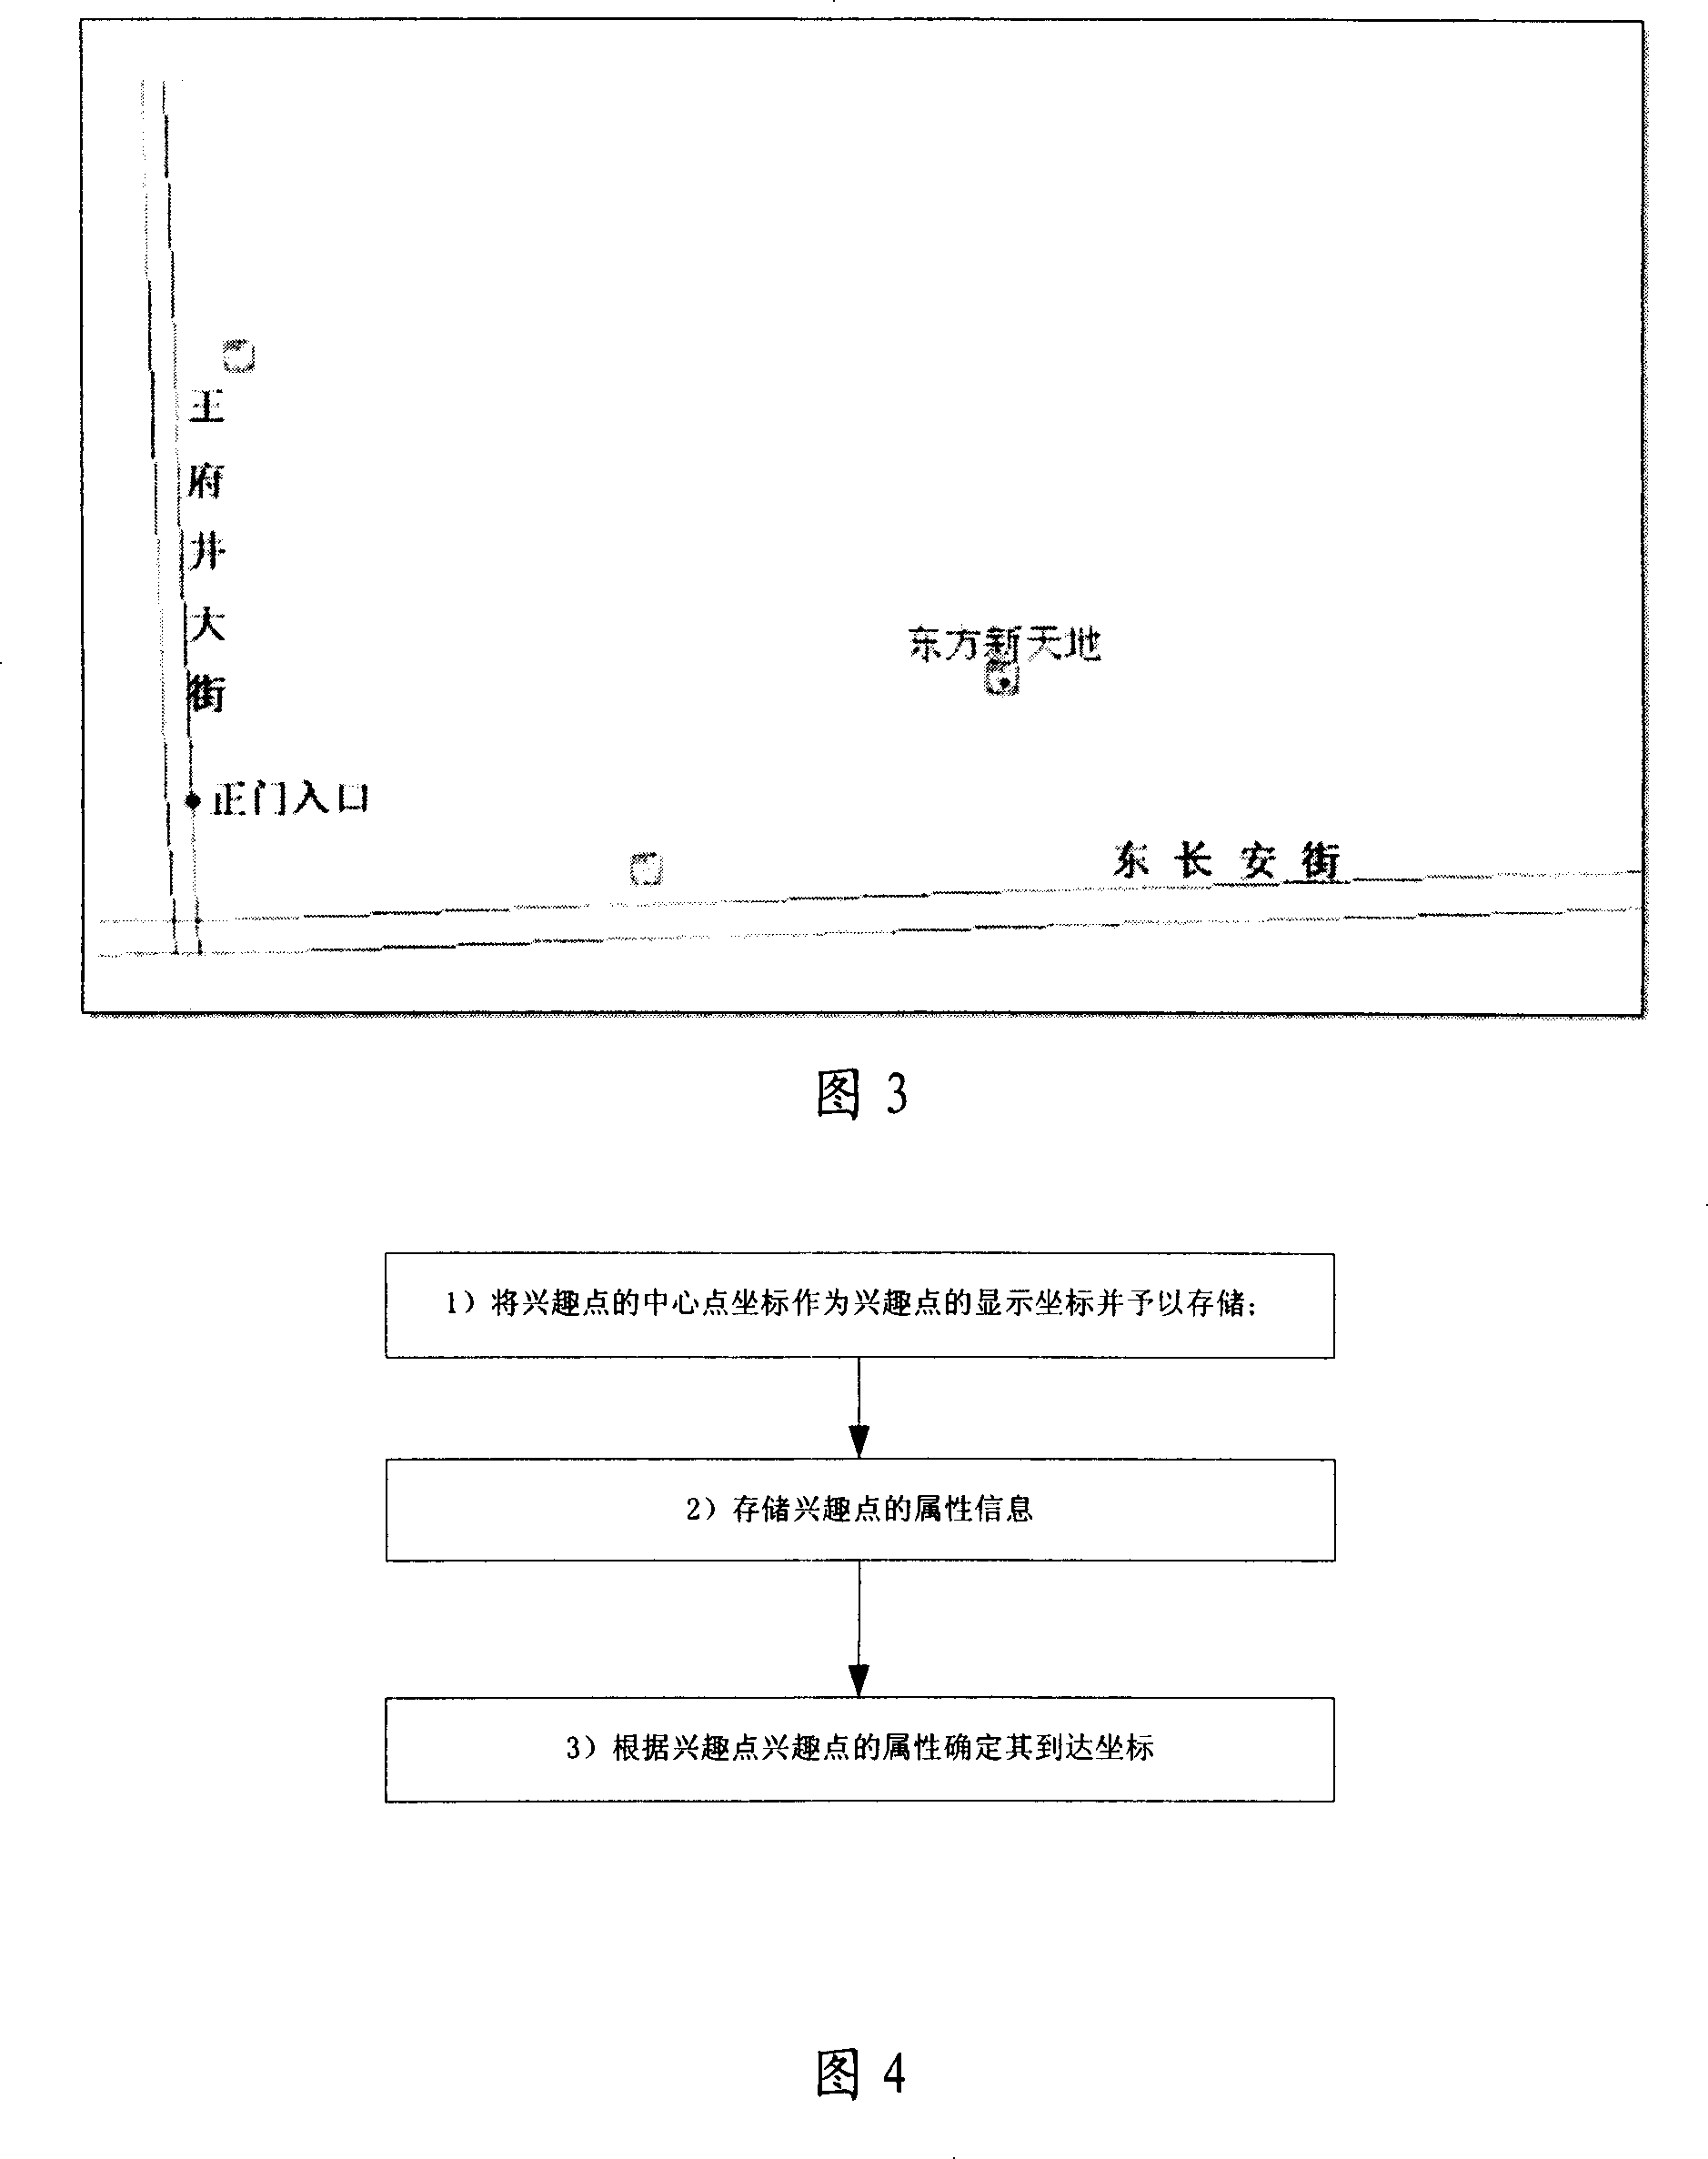 Interest point information storing method and navigation method using interest point information